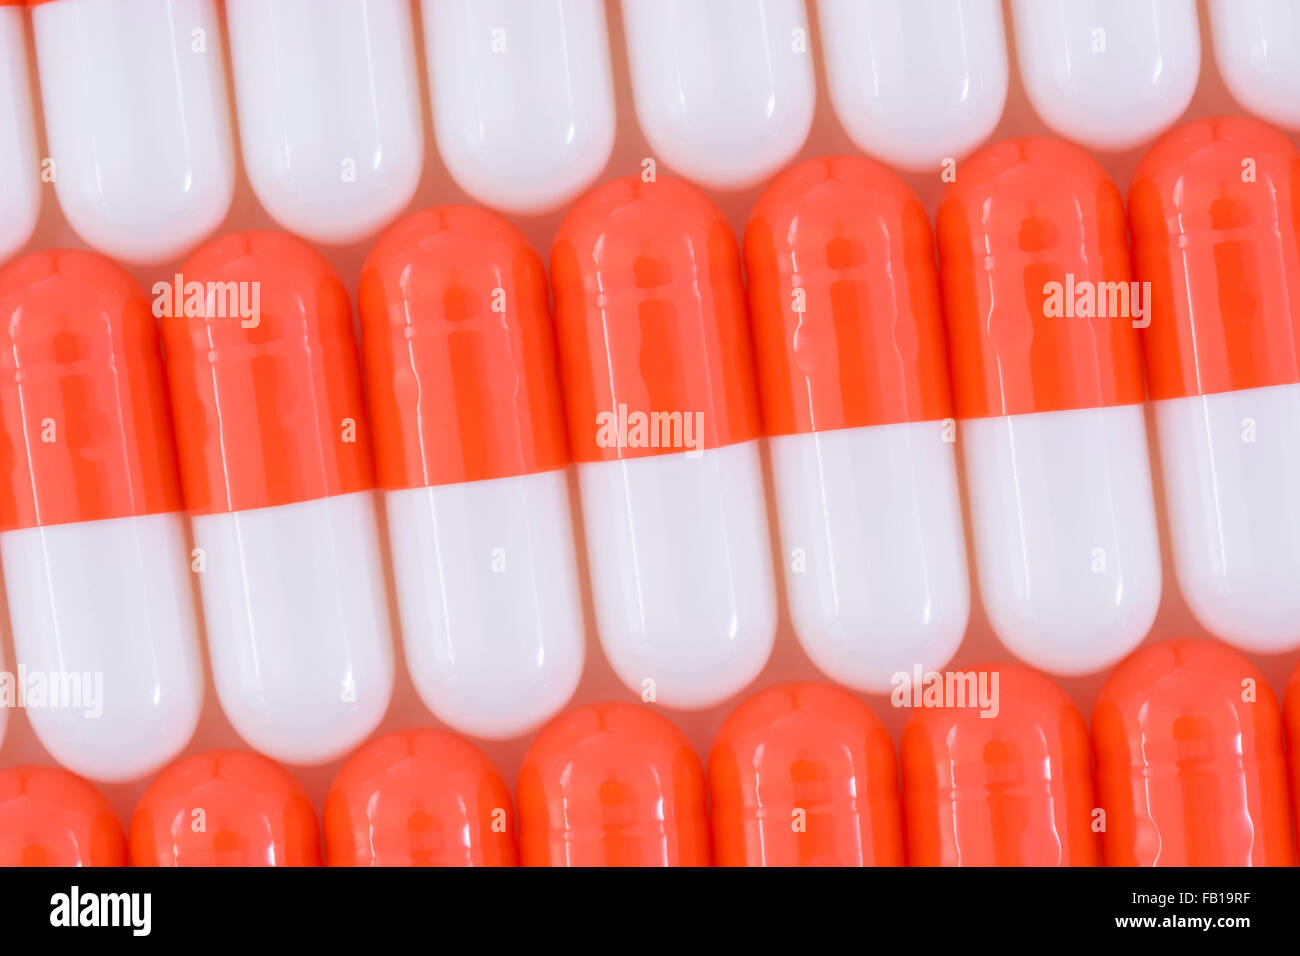 Close-up of pills - capsule form made of gelatin. Orange / White pills. Metaphor taking on American drug companies over high drug prices, drug trials. Stock Photo